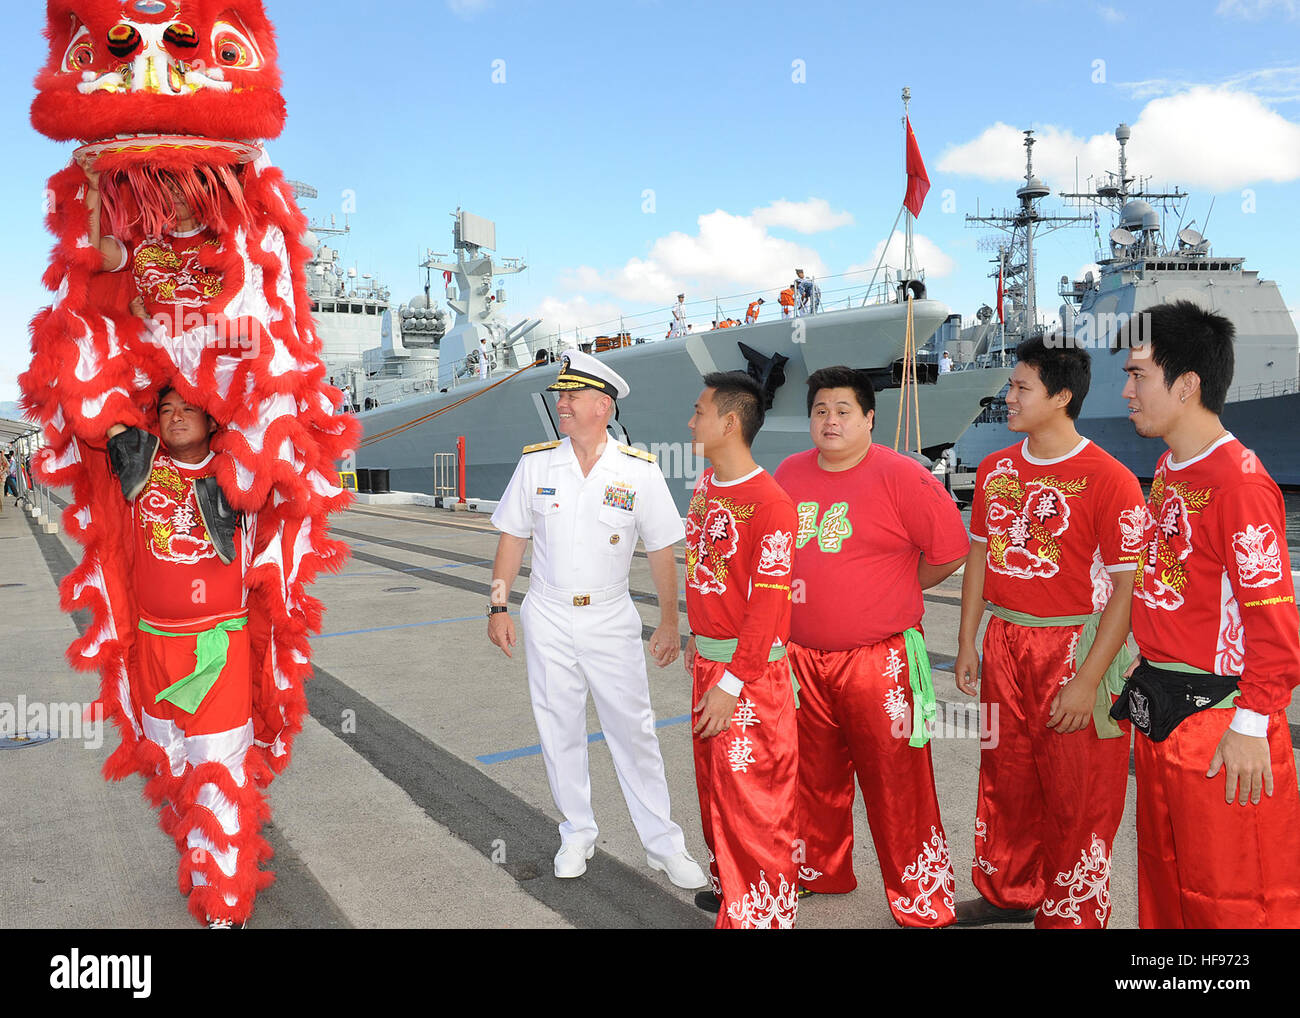 130906-N-ZK021-004 – PEARL HARBOR-HICKAM (Sept. 6, 2013) – Rear Adm. Rick Williams, commander, Navy Region Hawaii and Naval Surface Group Middle Pacific interacts with Chinese lion dancers prior to their performance during the arrival ceremony for three People’s Liberation Army-Navy ships Luhu-class destroyer Qingdao (DDG 113), Jiangkai-class frigate Linyi (FFG 547) and a Fuqing-class fleet oiler as they arrive in Hawaii for a scheduled port visit. Over the weekend, Chinese and U.S. leaders will conduct dialogues to build confidence and mutual understanding between the two nations. The port vi Stock Photo